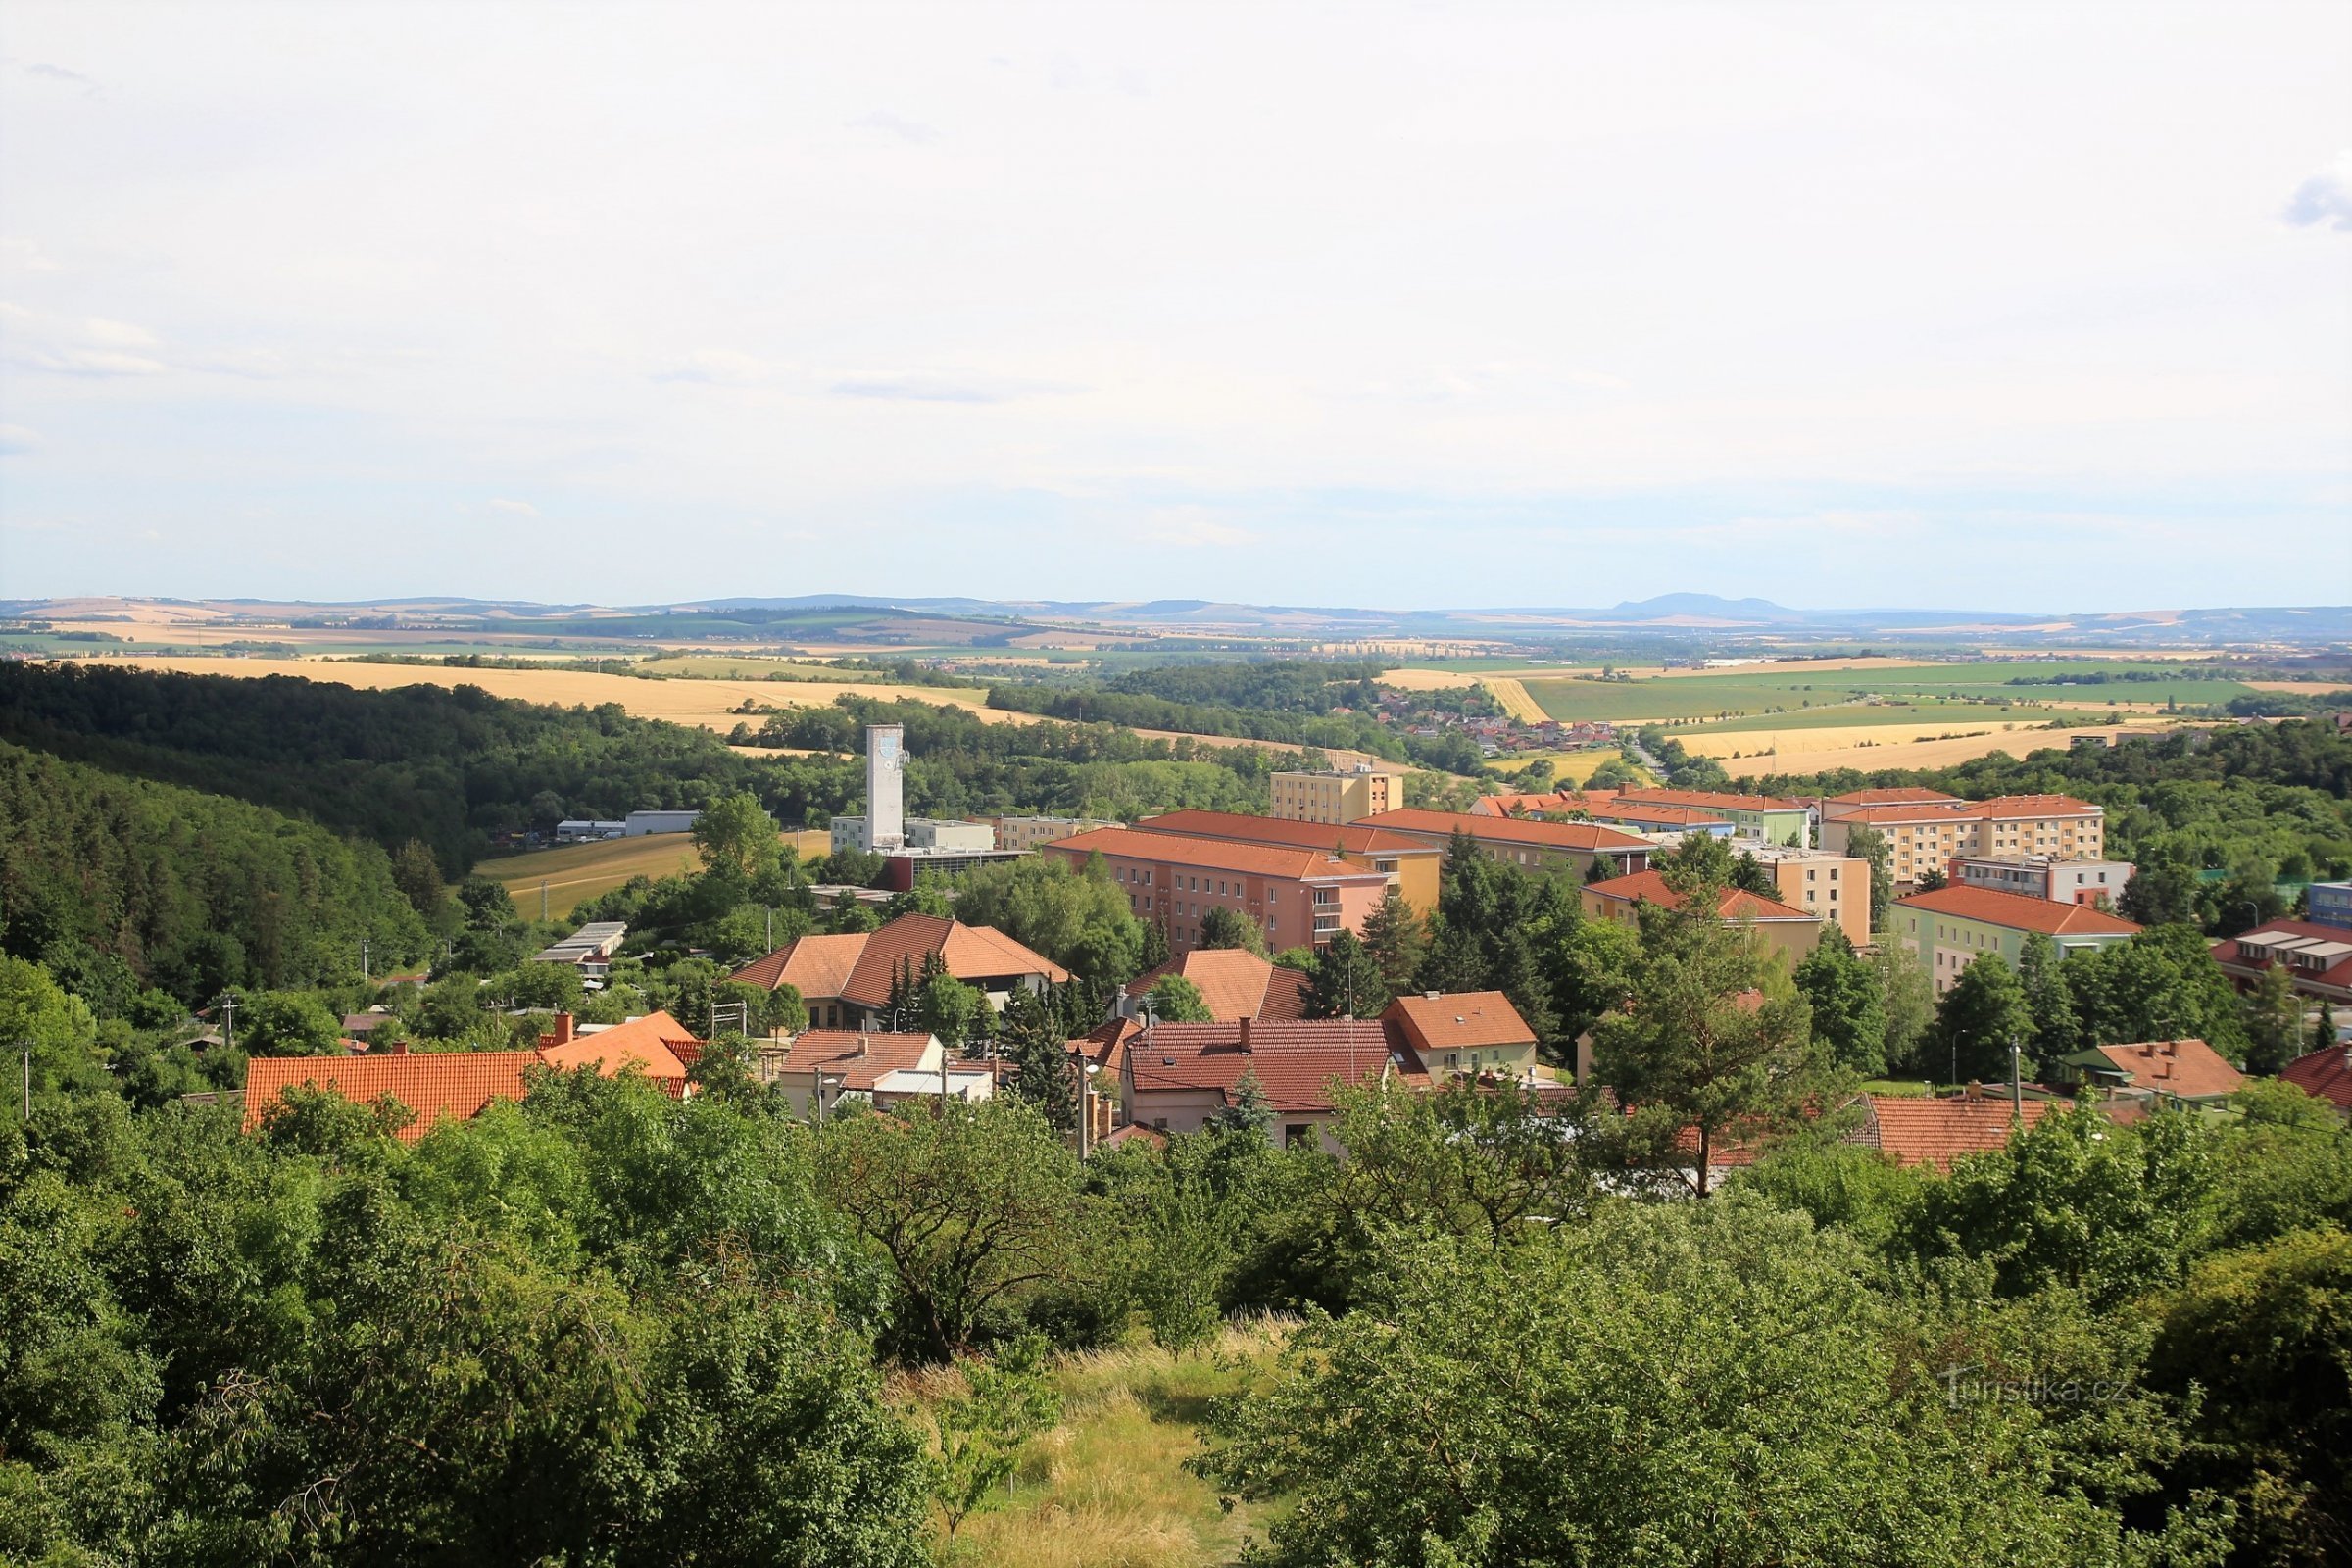 The most interesting views from the observation tower are towards the south towards the fertile South Moravian plains